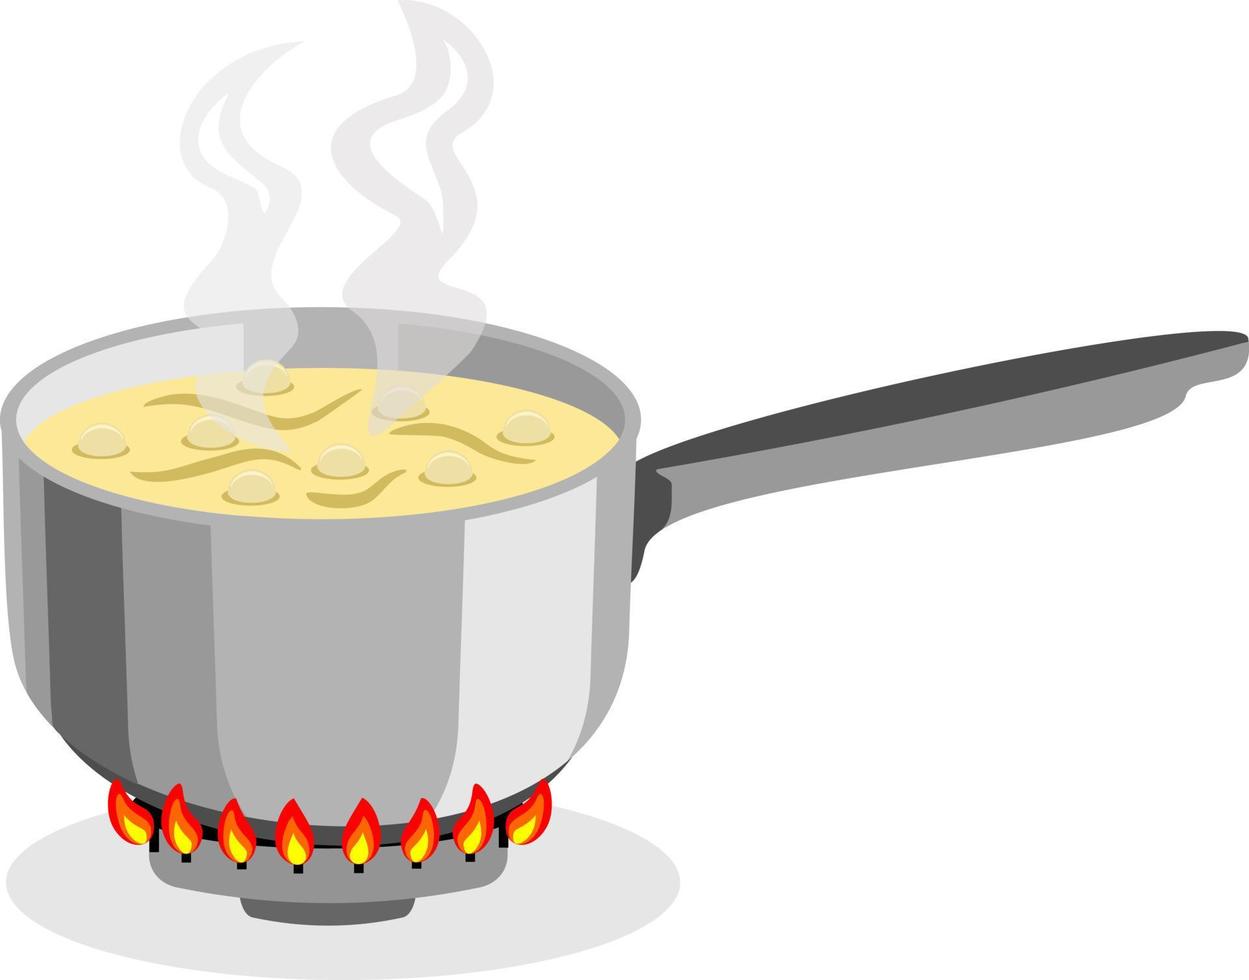 Kitchen utensils. Pot, ladle of food are cooked on the gas stove. home cooking concept. Place of cooking. vector